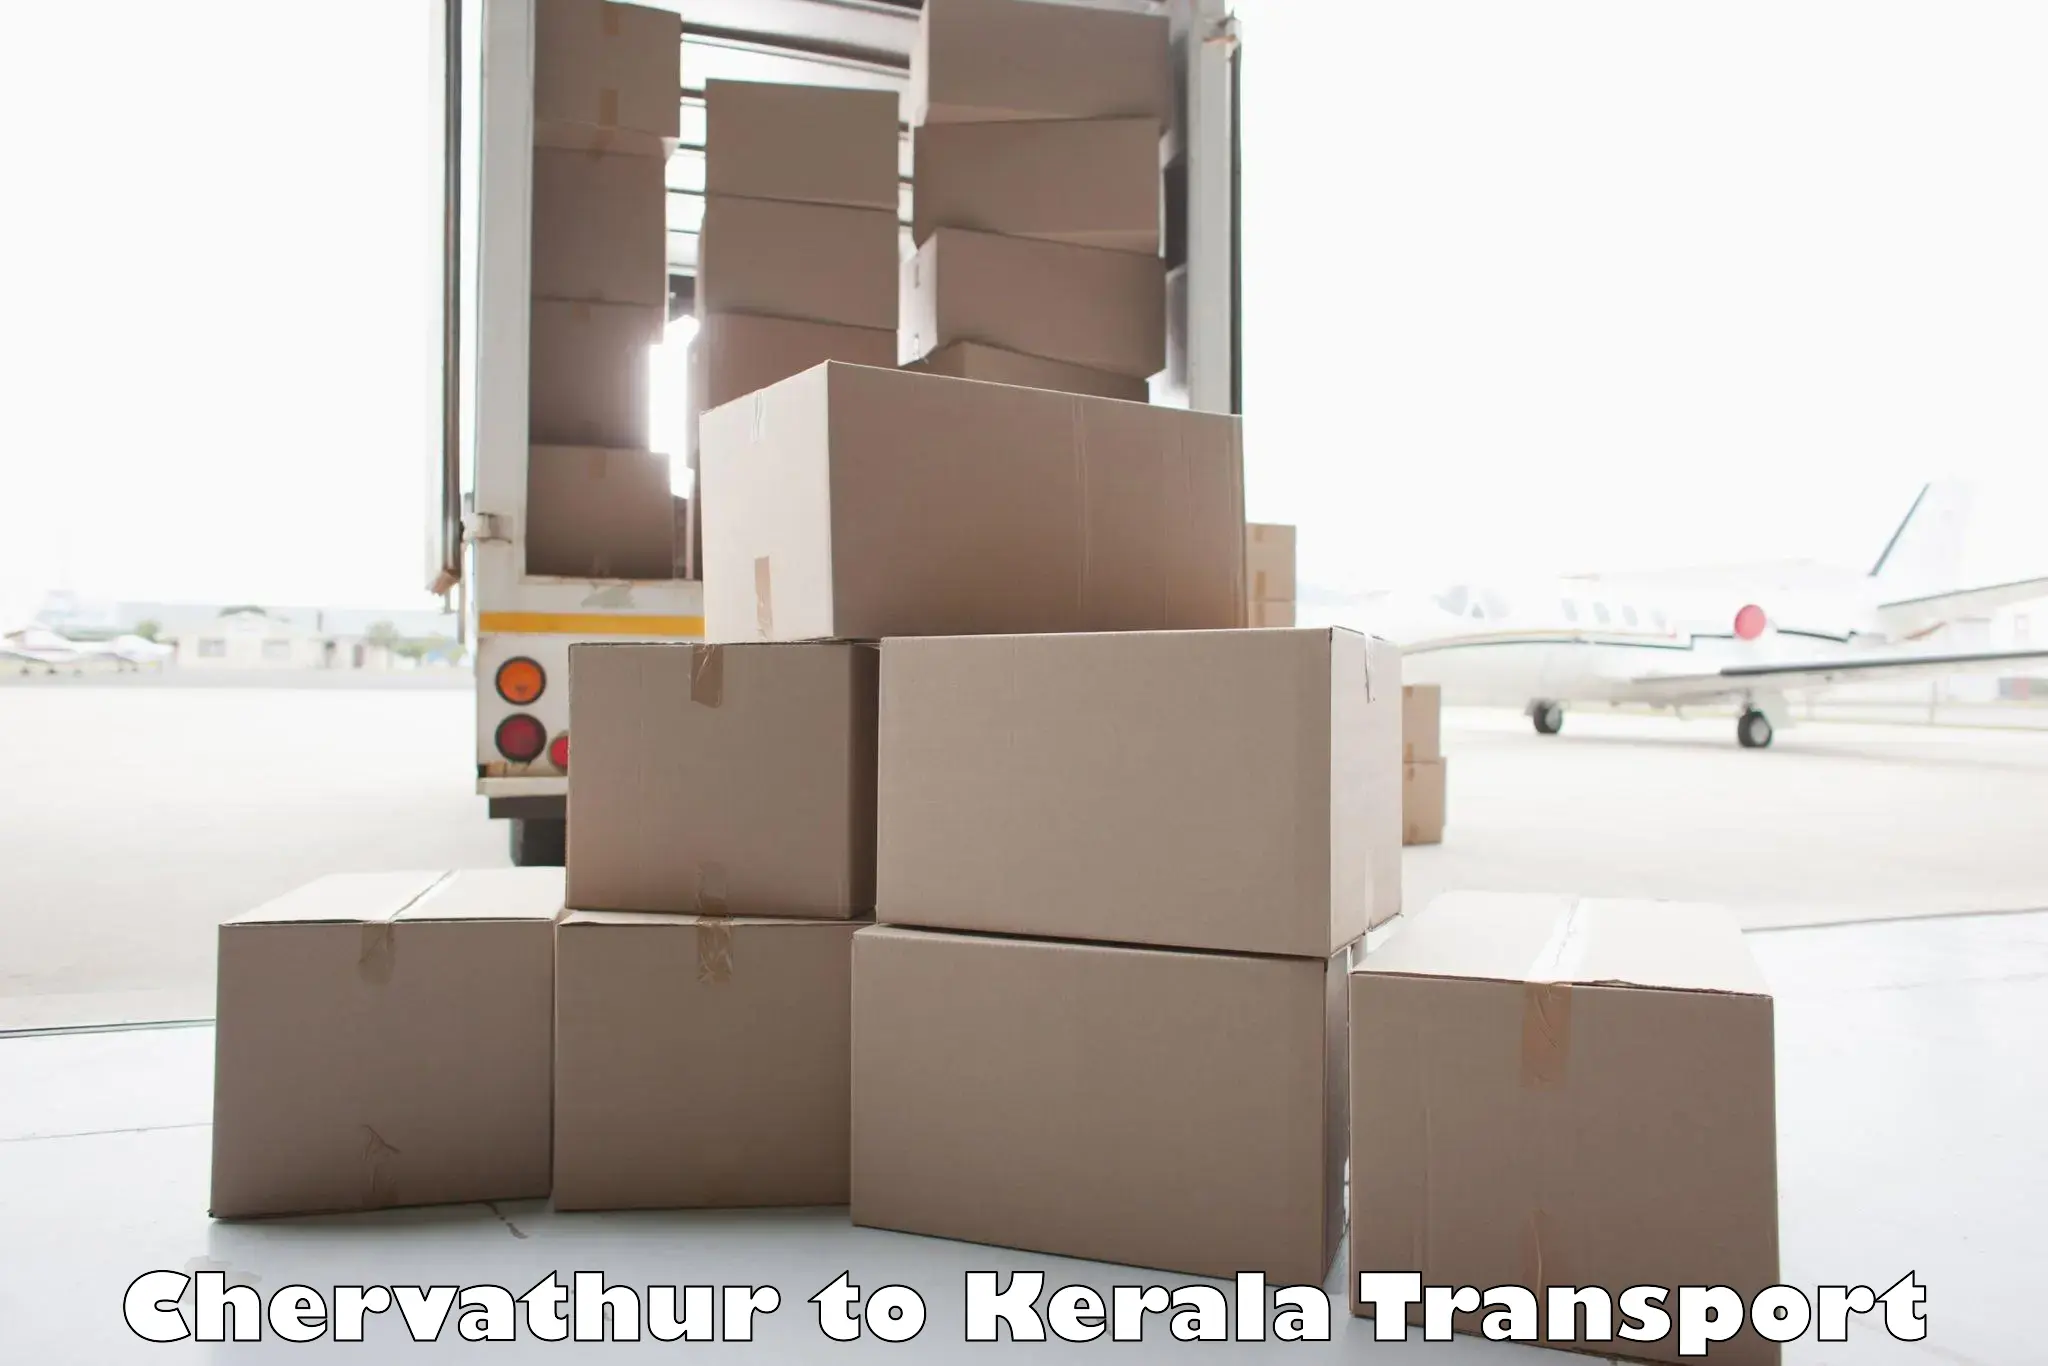 Shipping partner Chervathur to Cochin University of Science and Technology